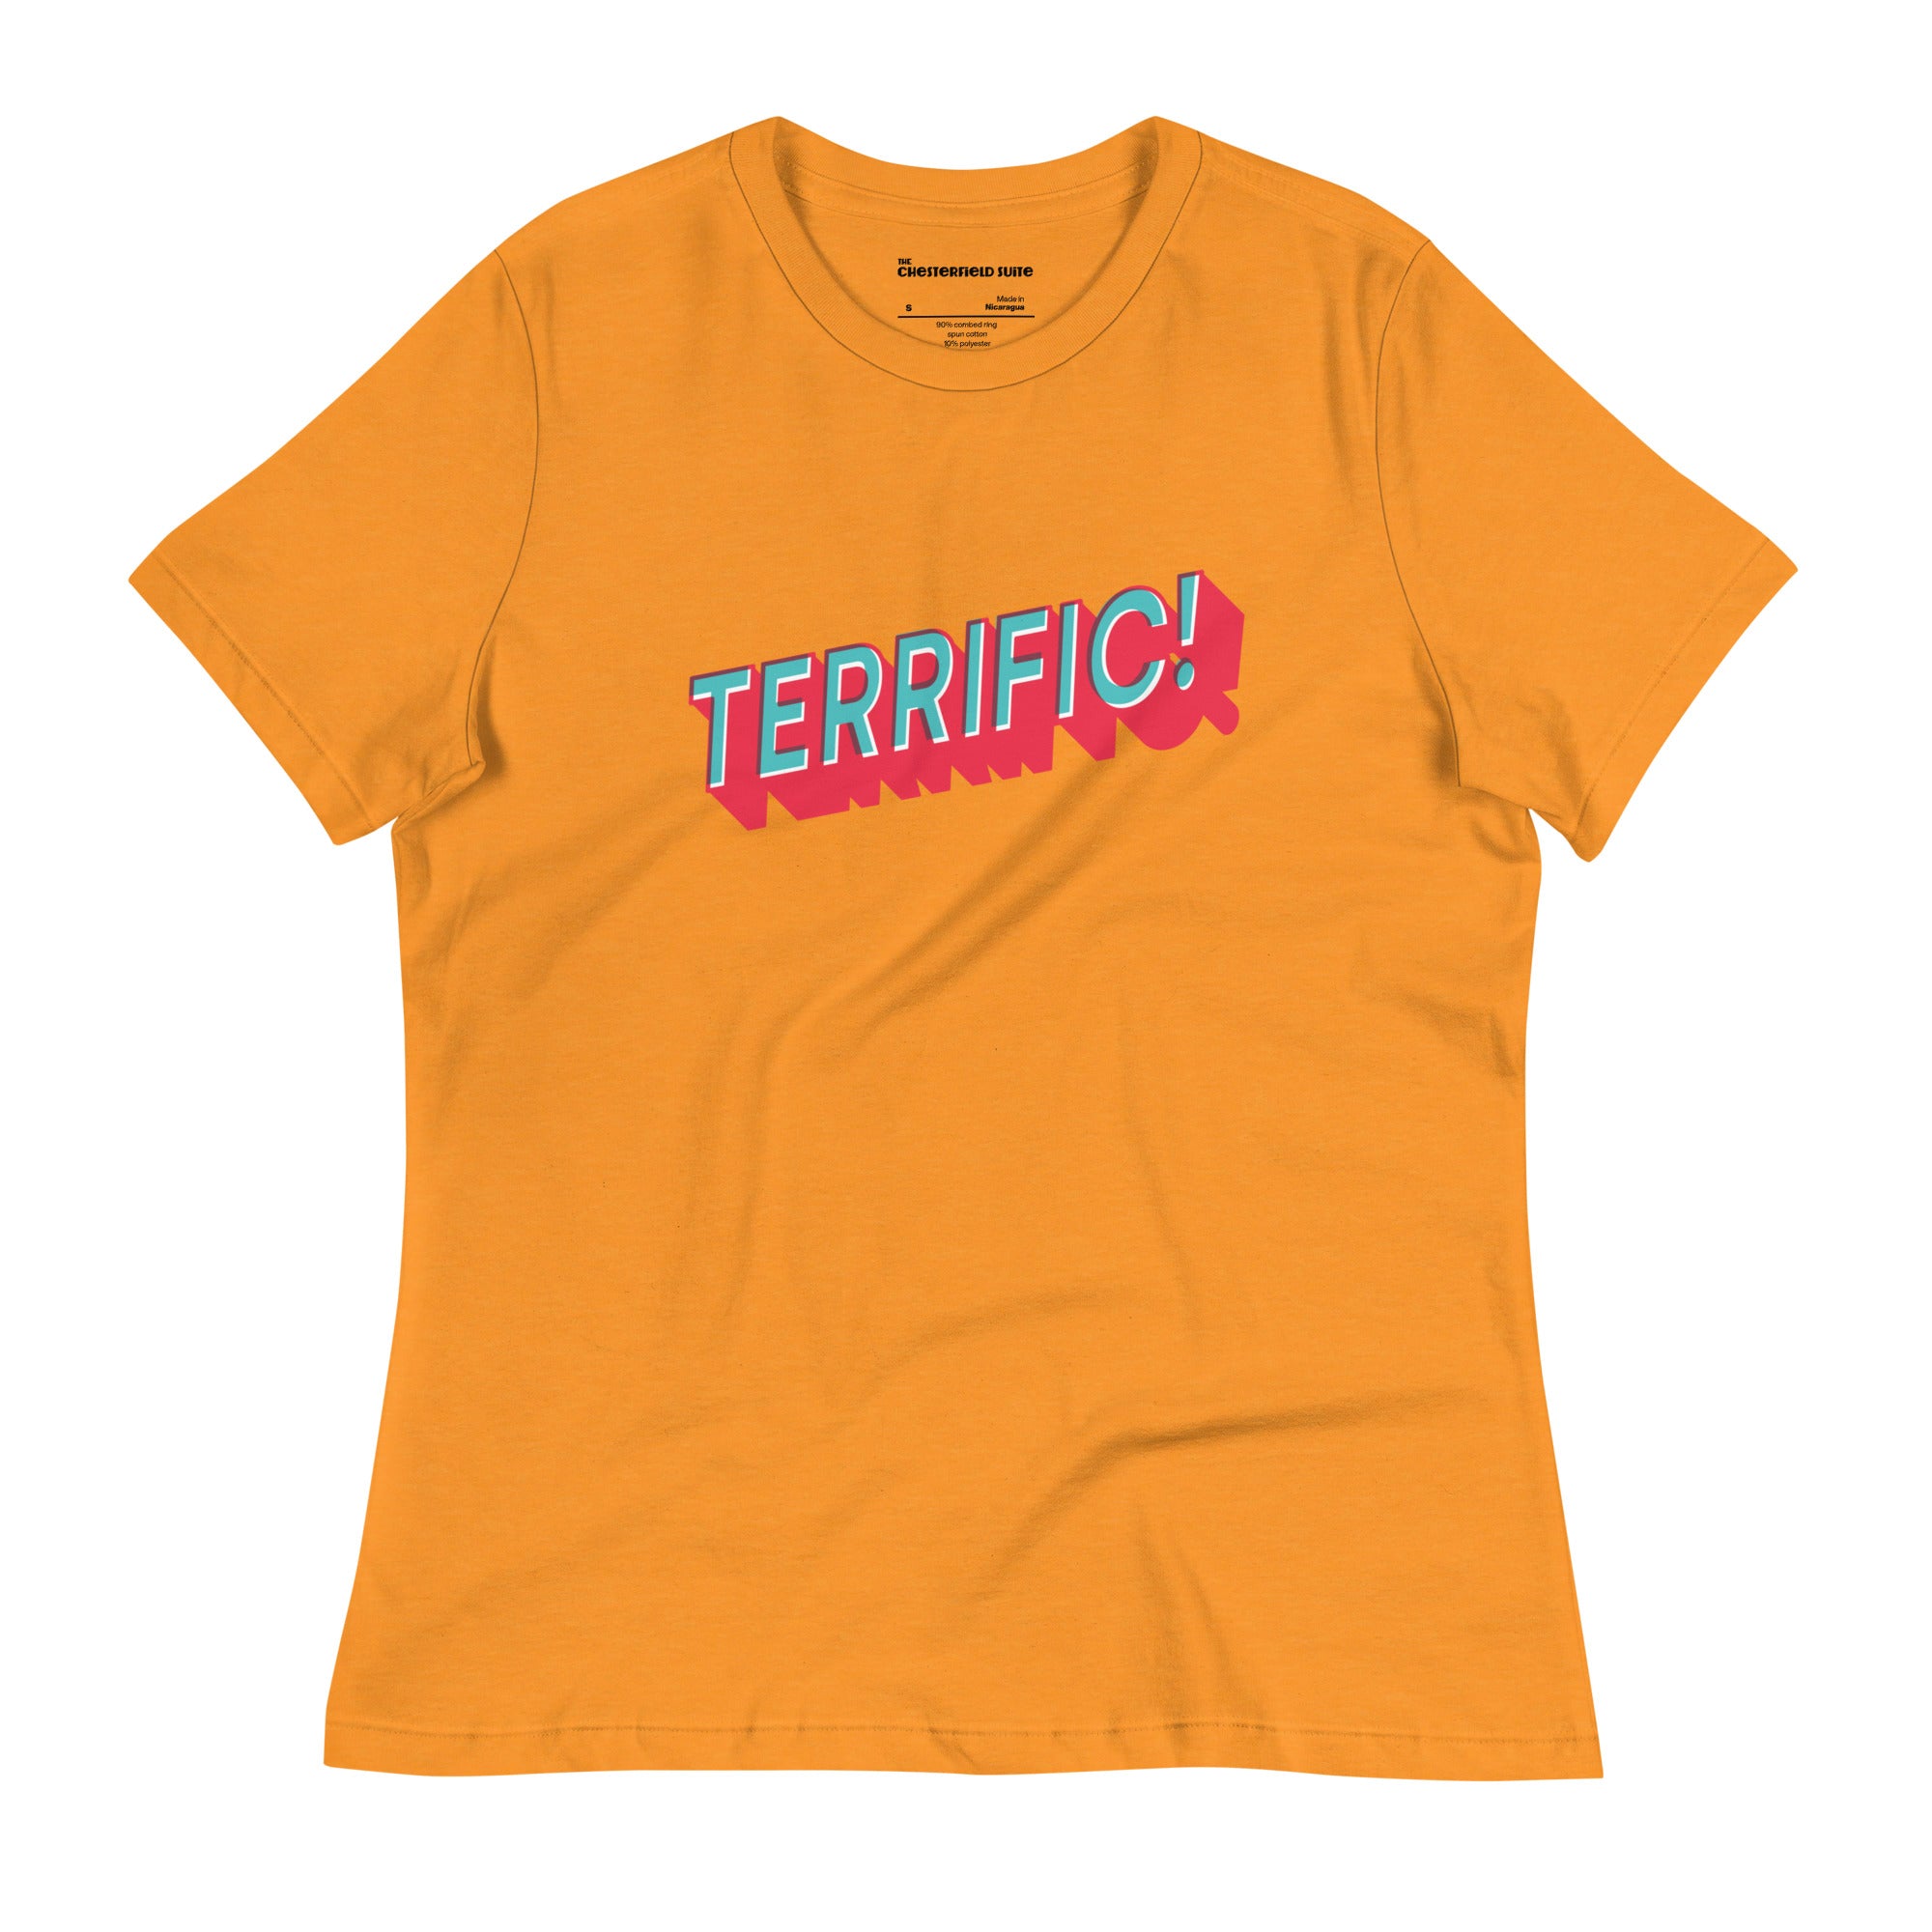 the word terrific in turquoise and red on an orange women's t-shirt